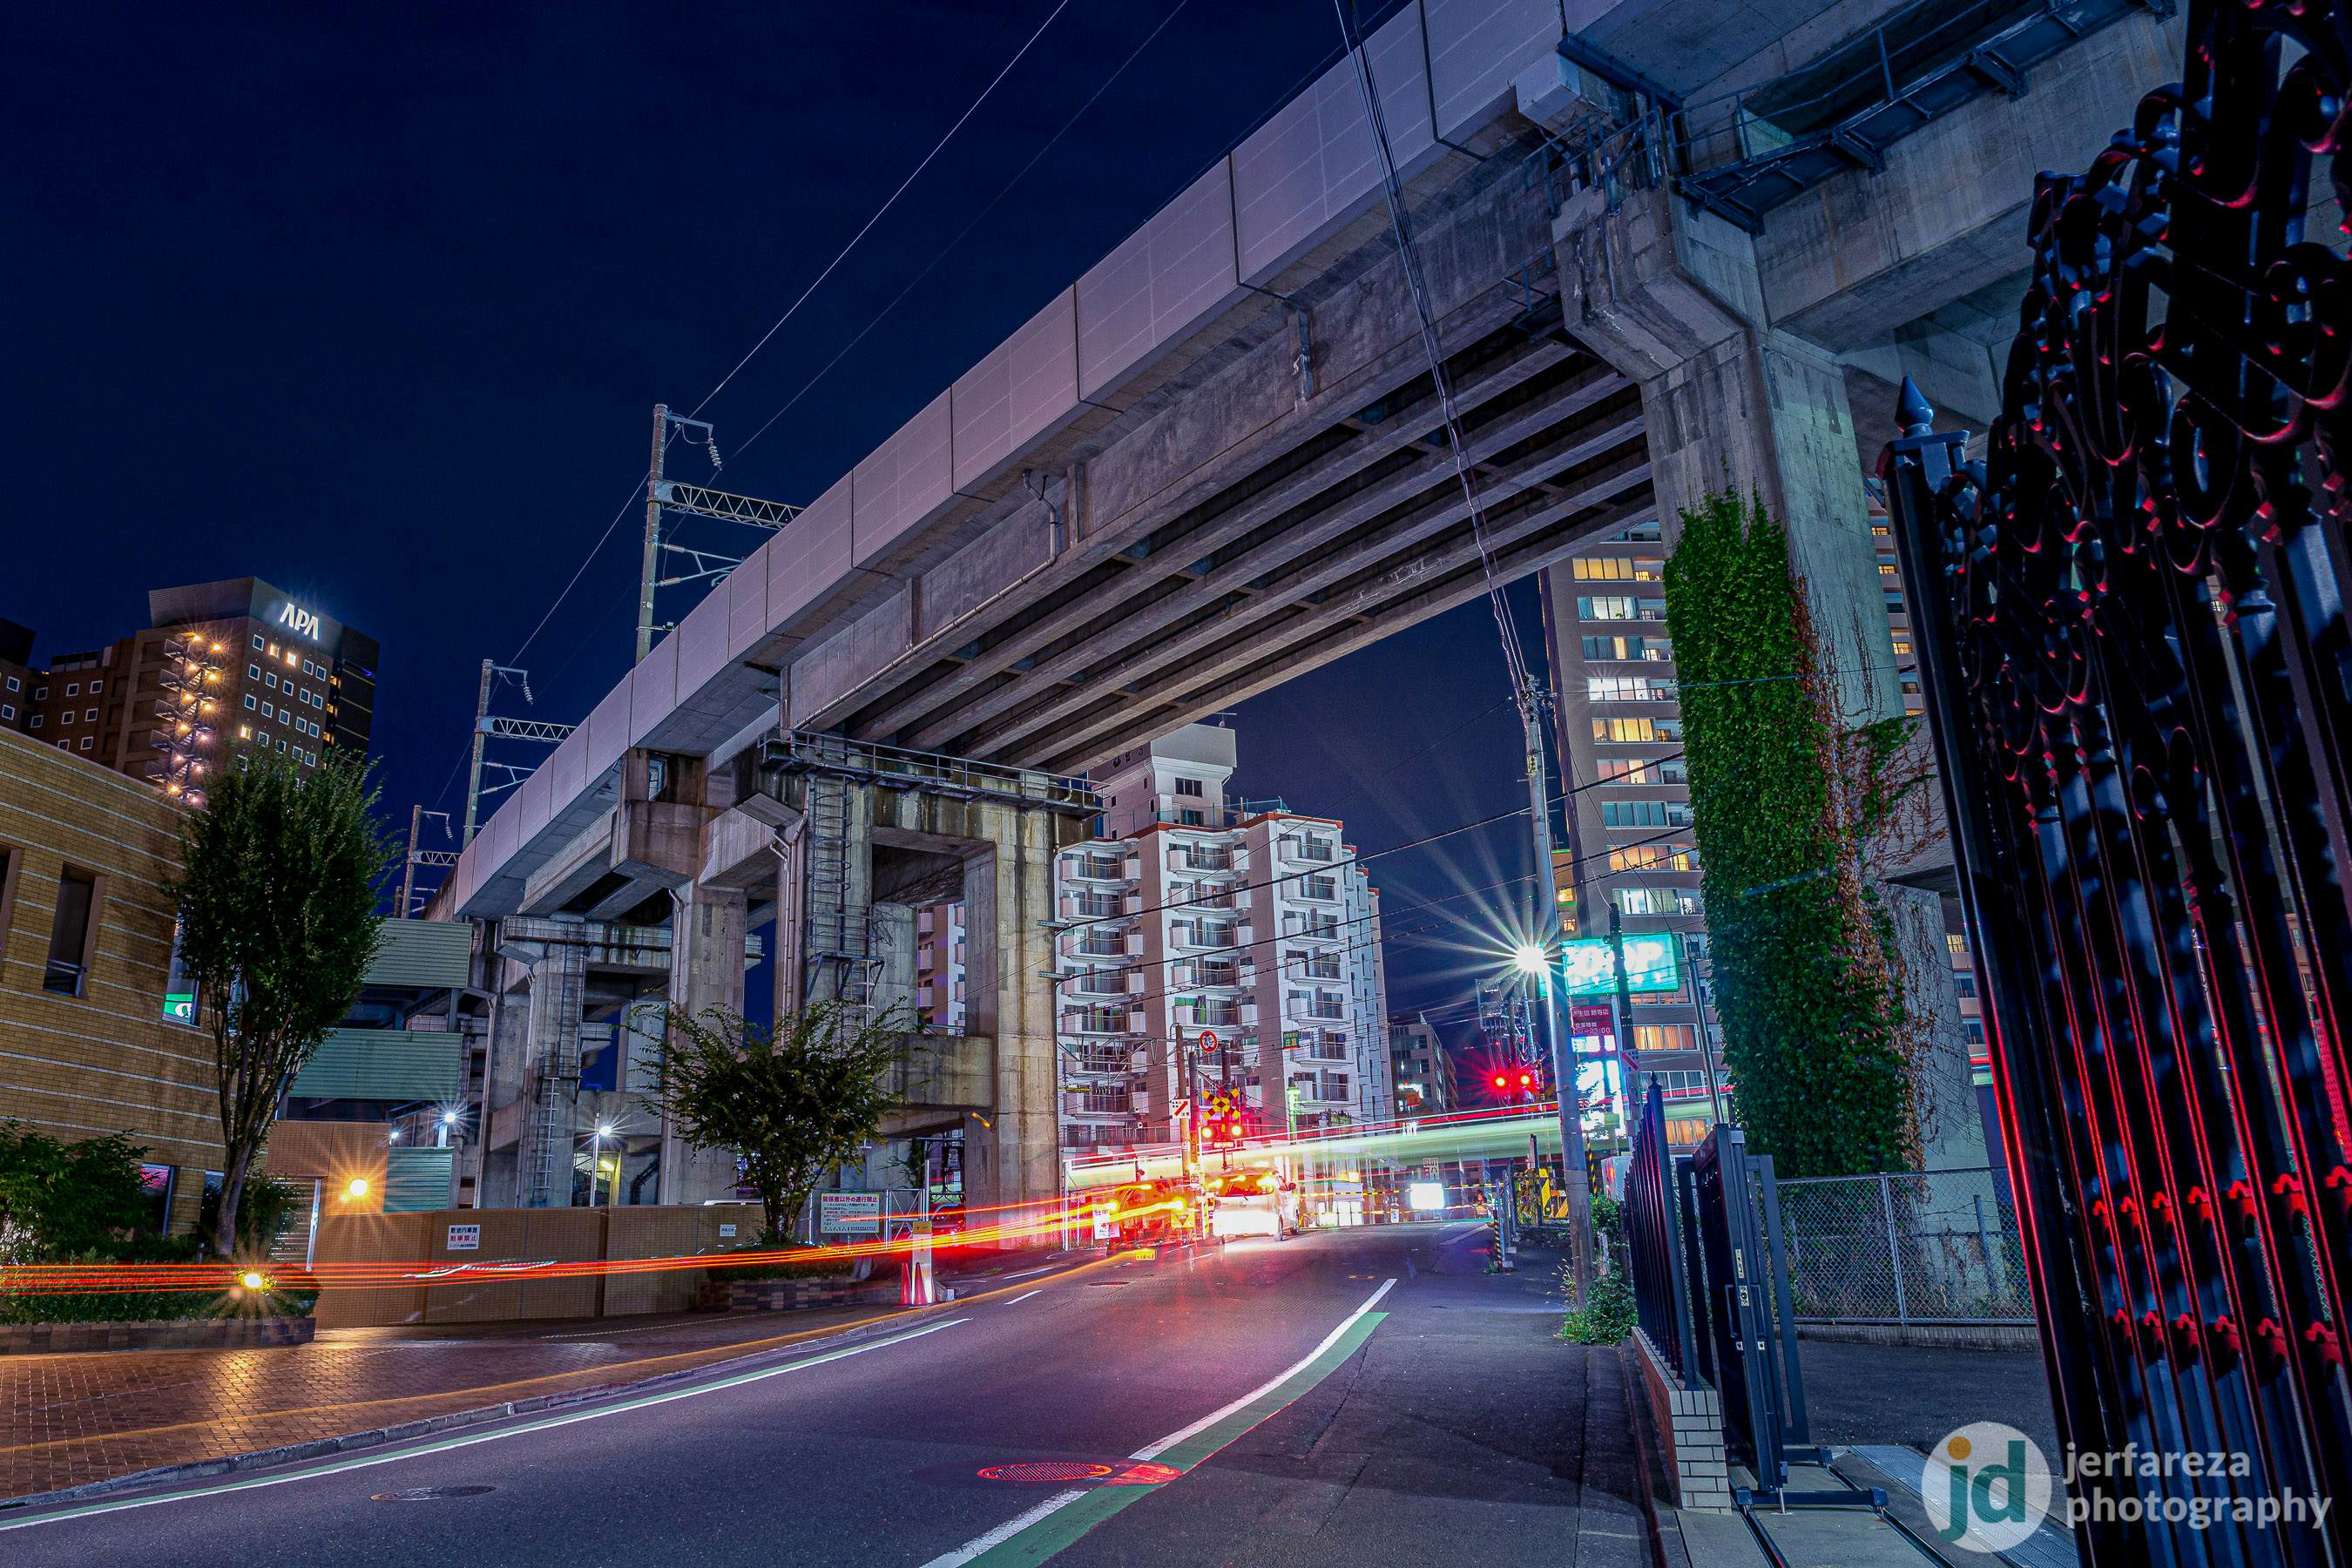 7 Tips for Night Photography in the City